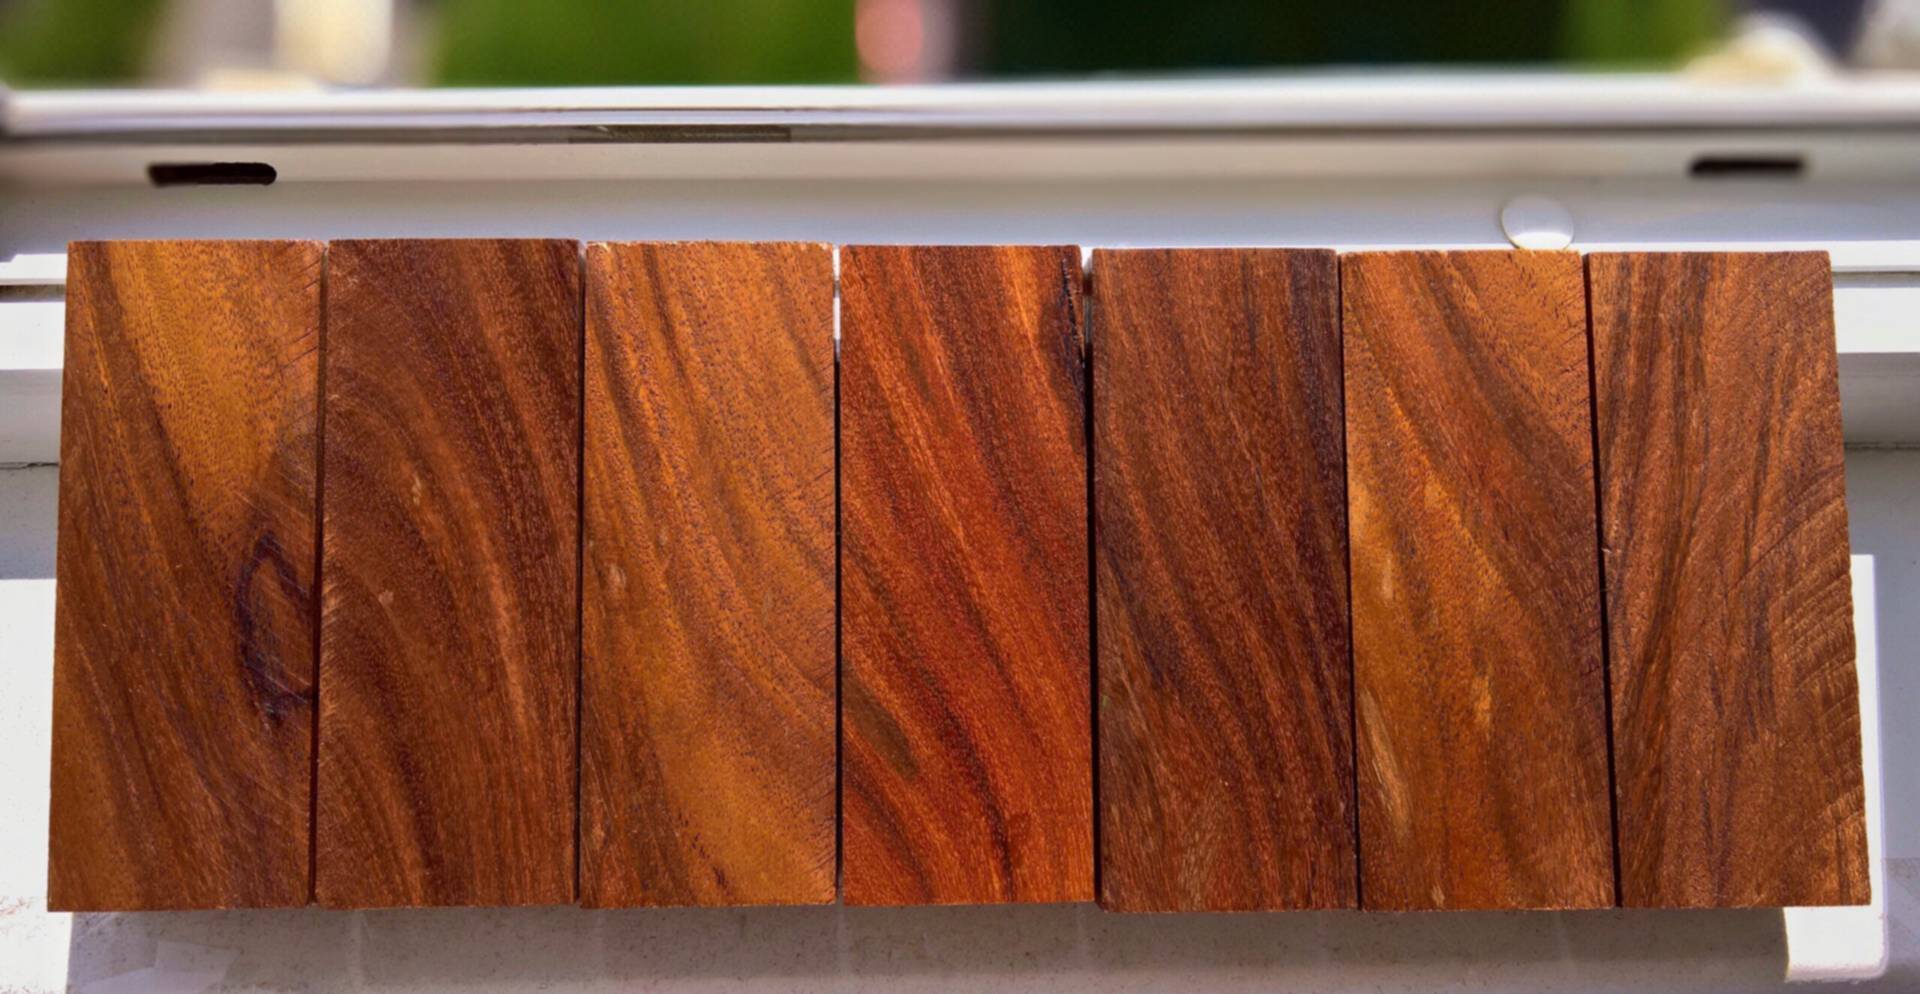 Polished aluminum knobs with ebony and cocobolo inlays